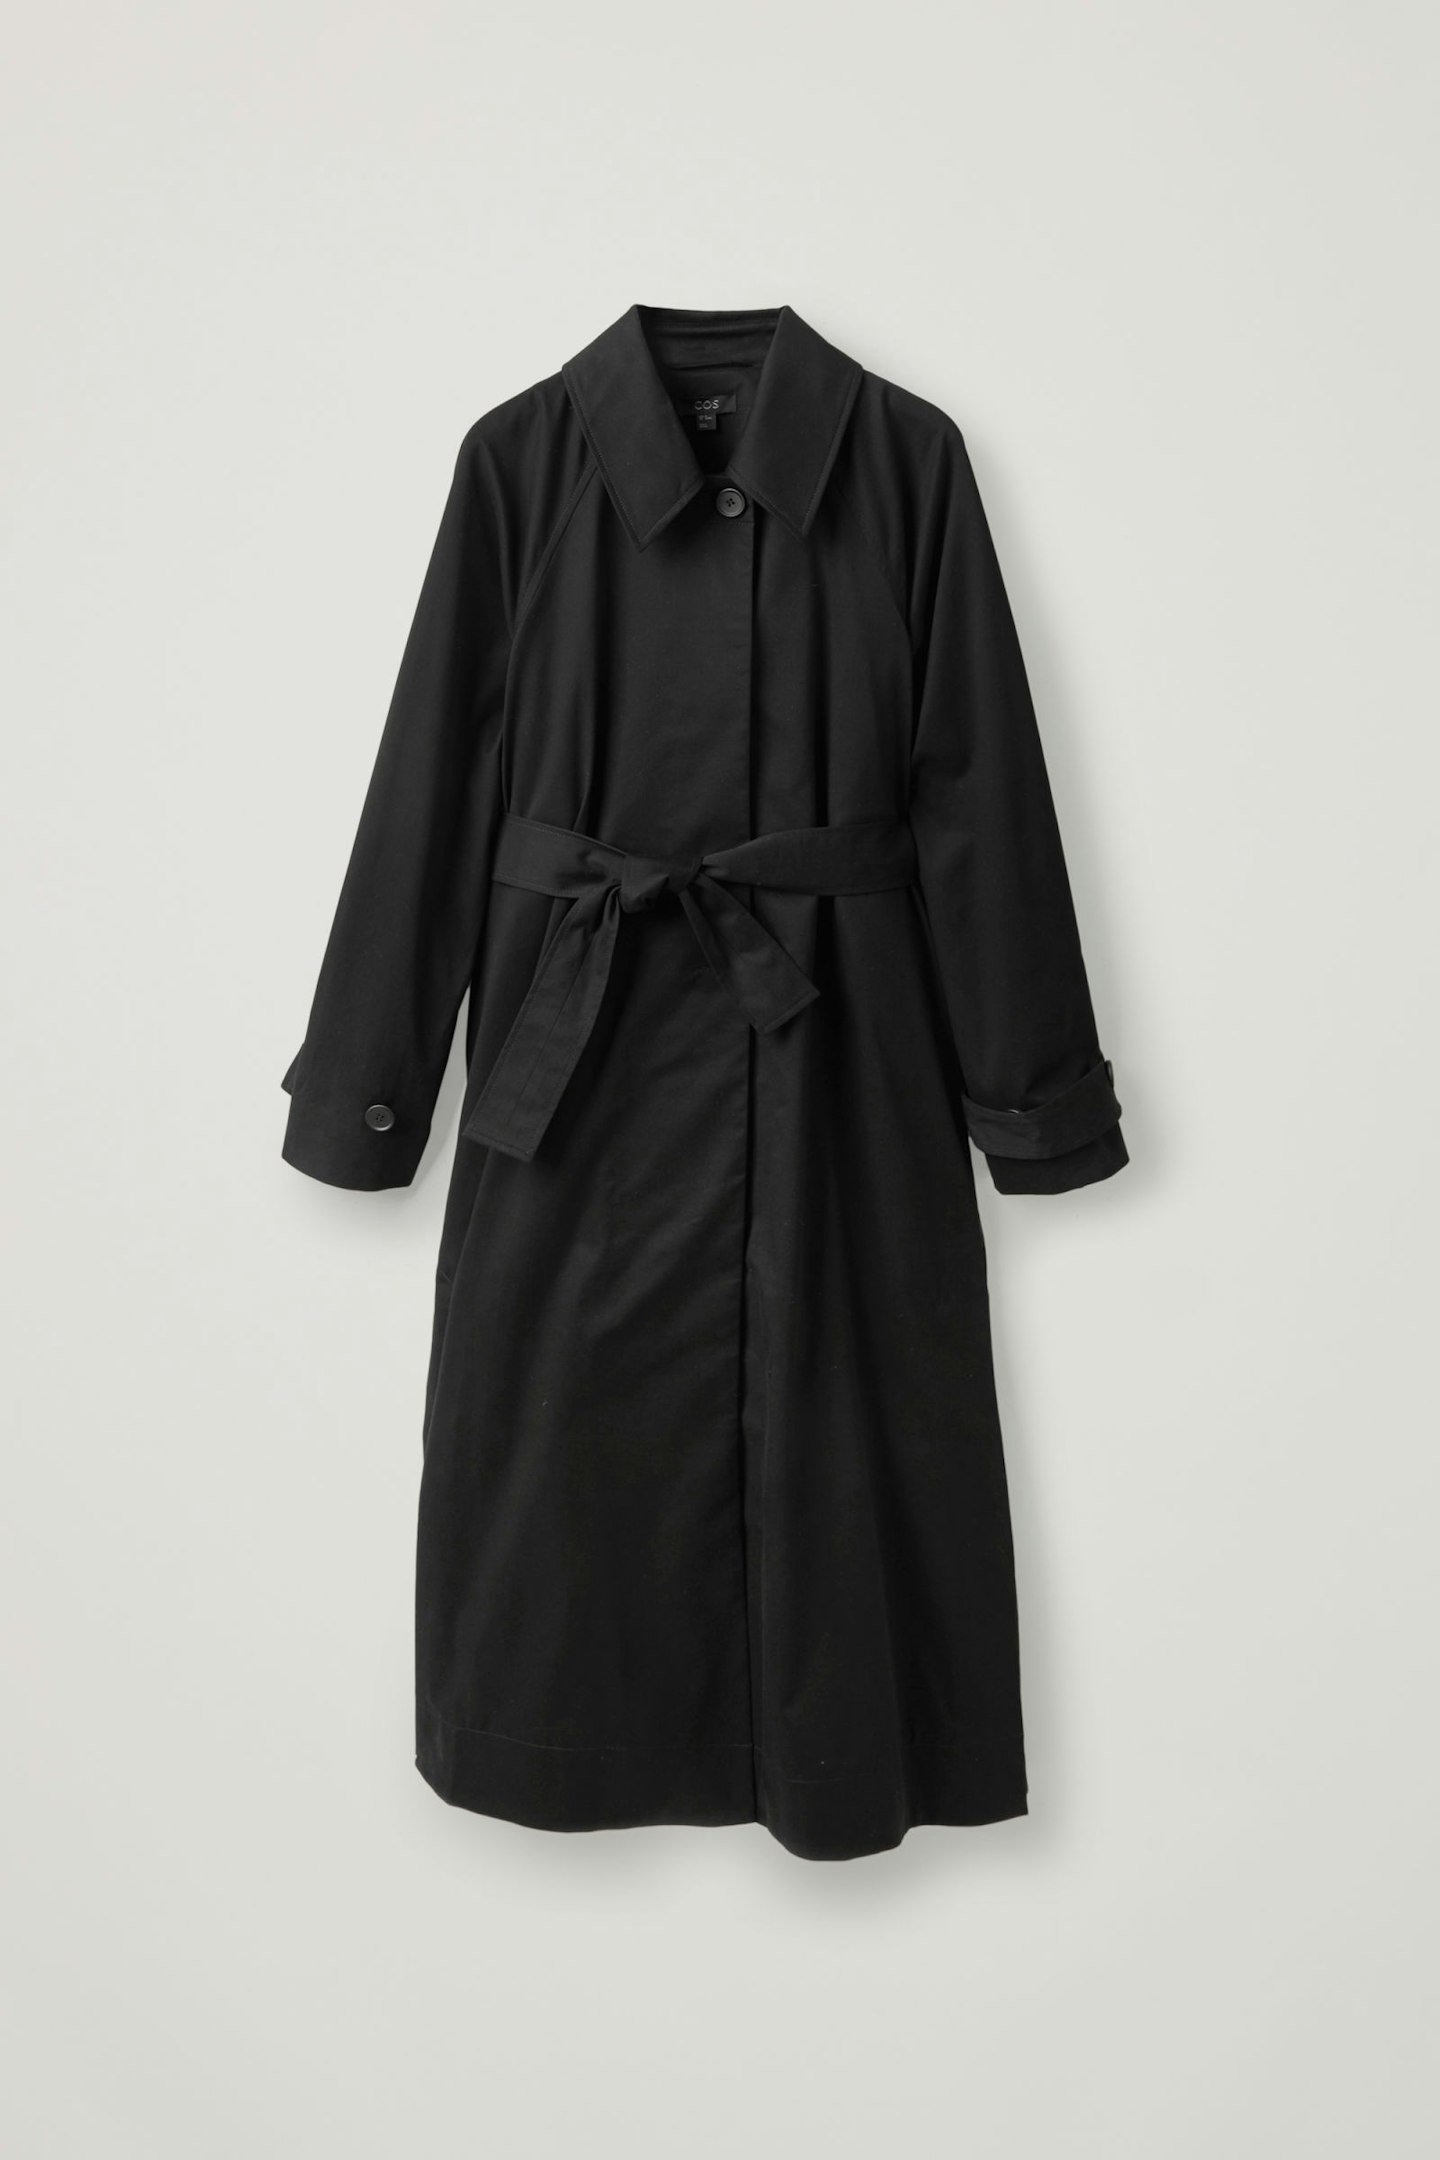 COS, Organic Cotton Oversized Trench Coat, £150